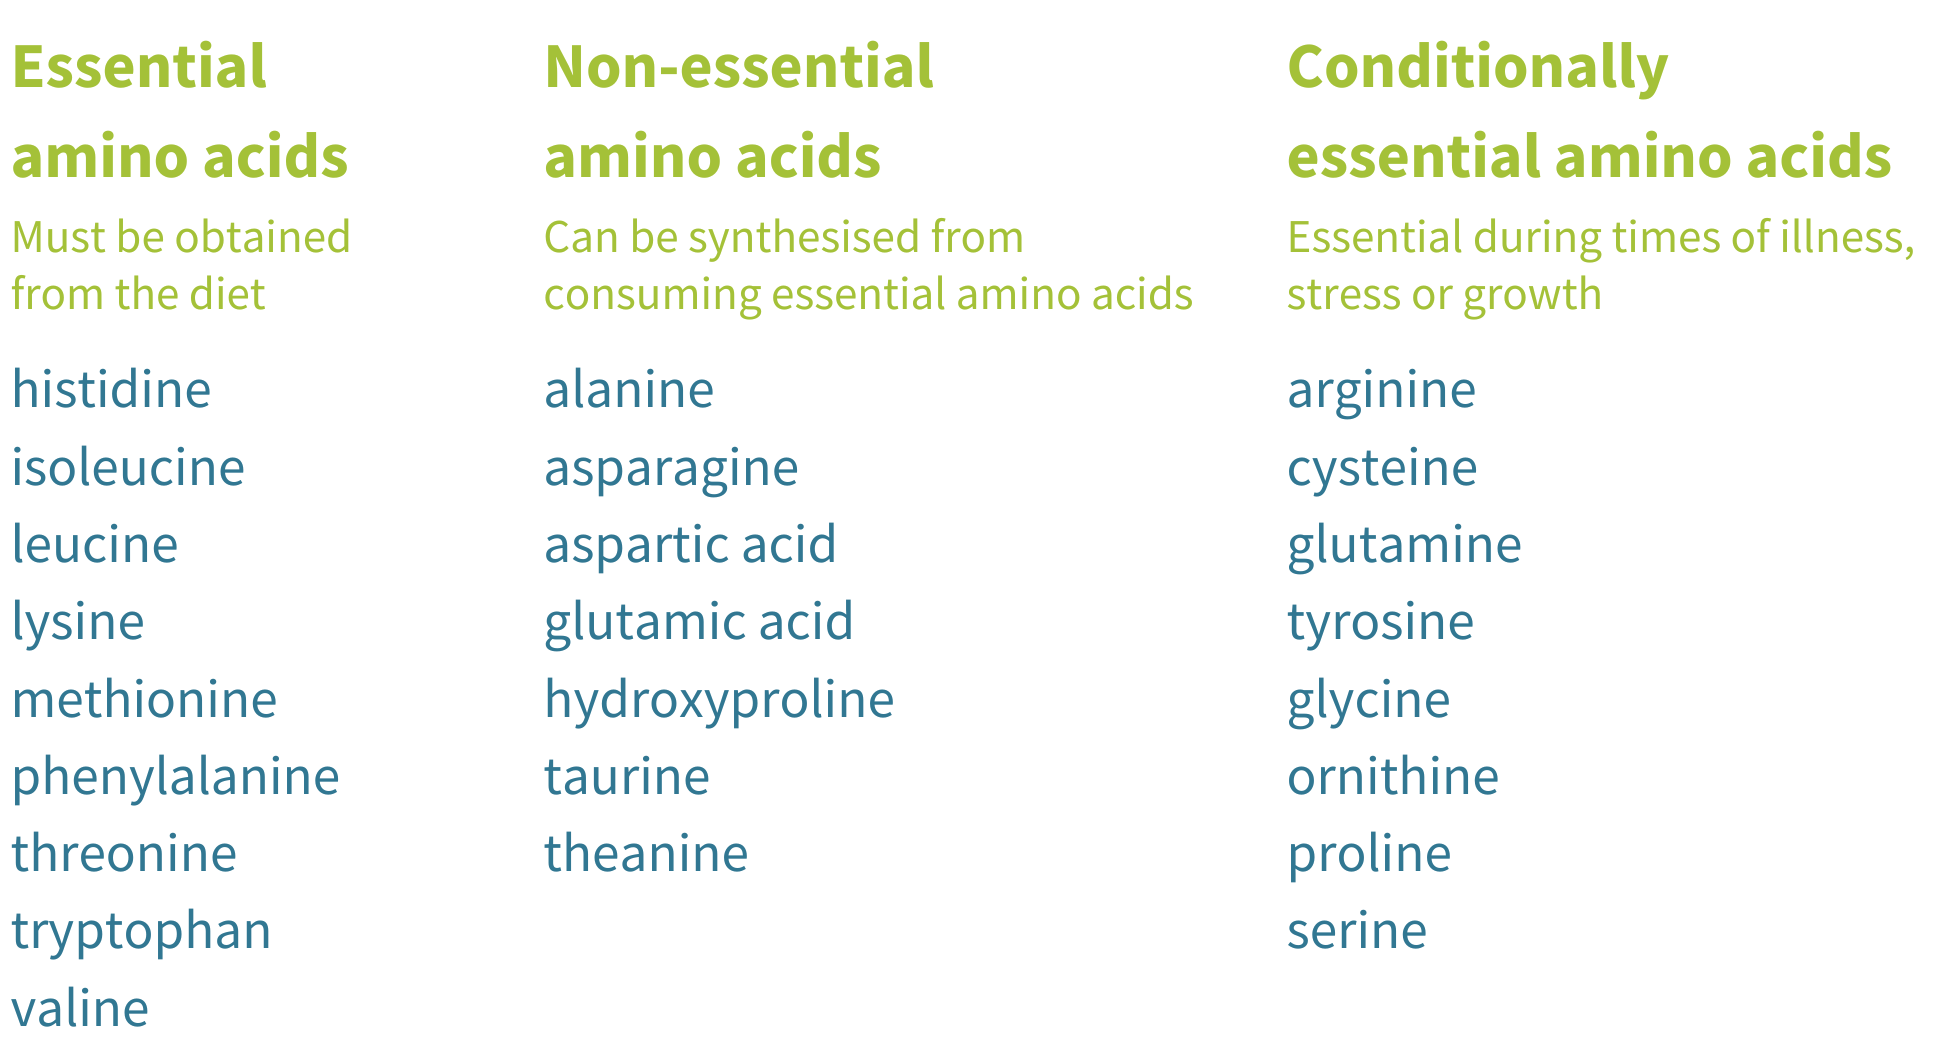 essential, non-essential and conditionally essential amino acid table